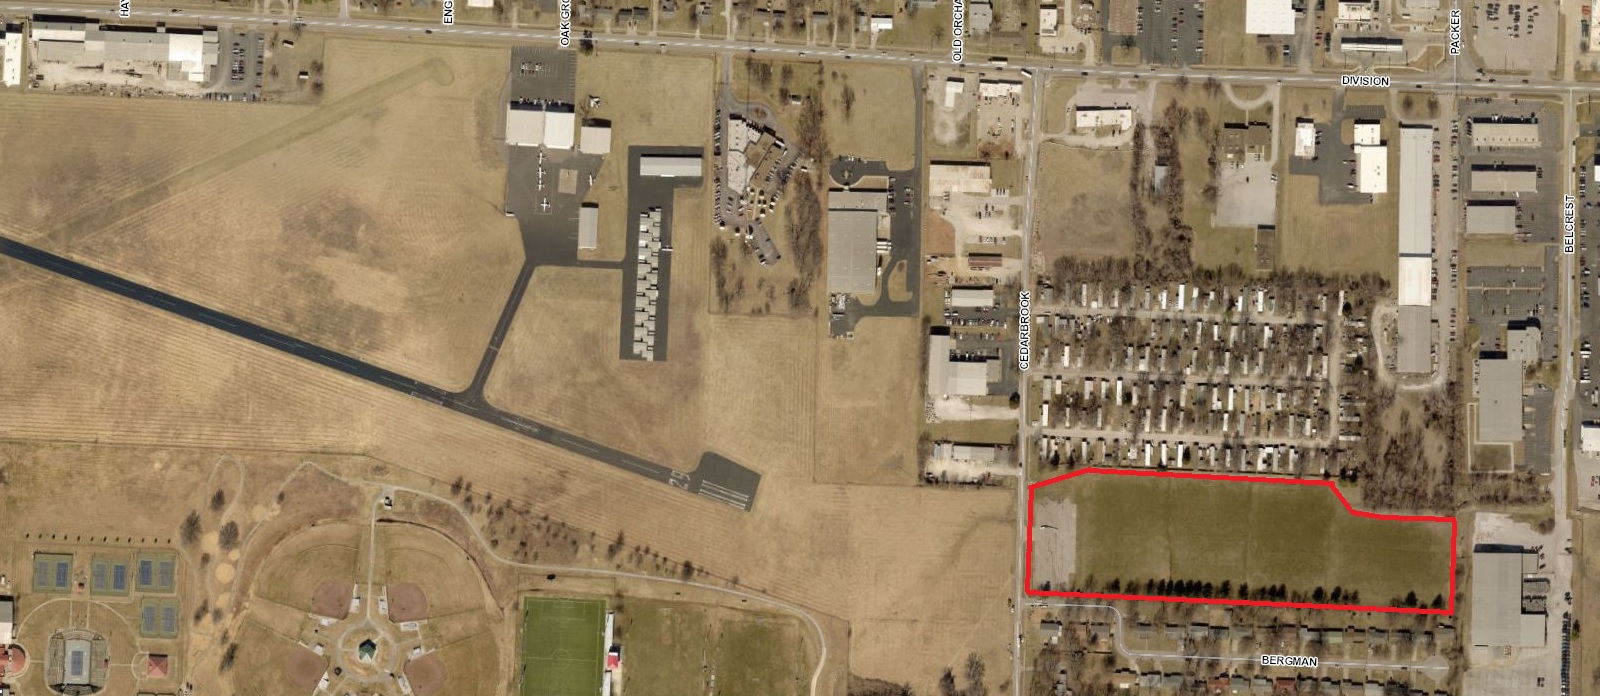 Twelve acres of land east of the Downtown Springfield Airport used as extra space for soccer practice.